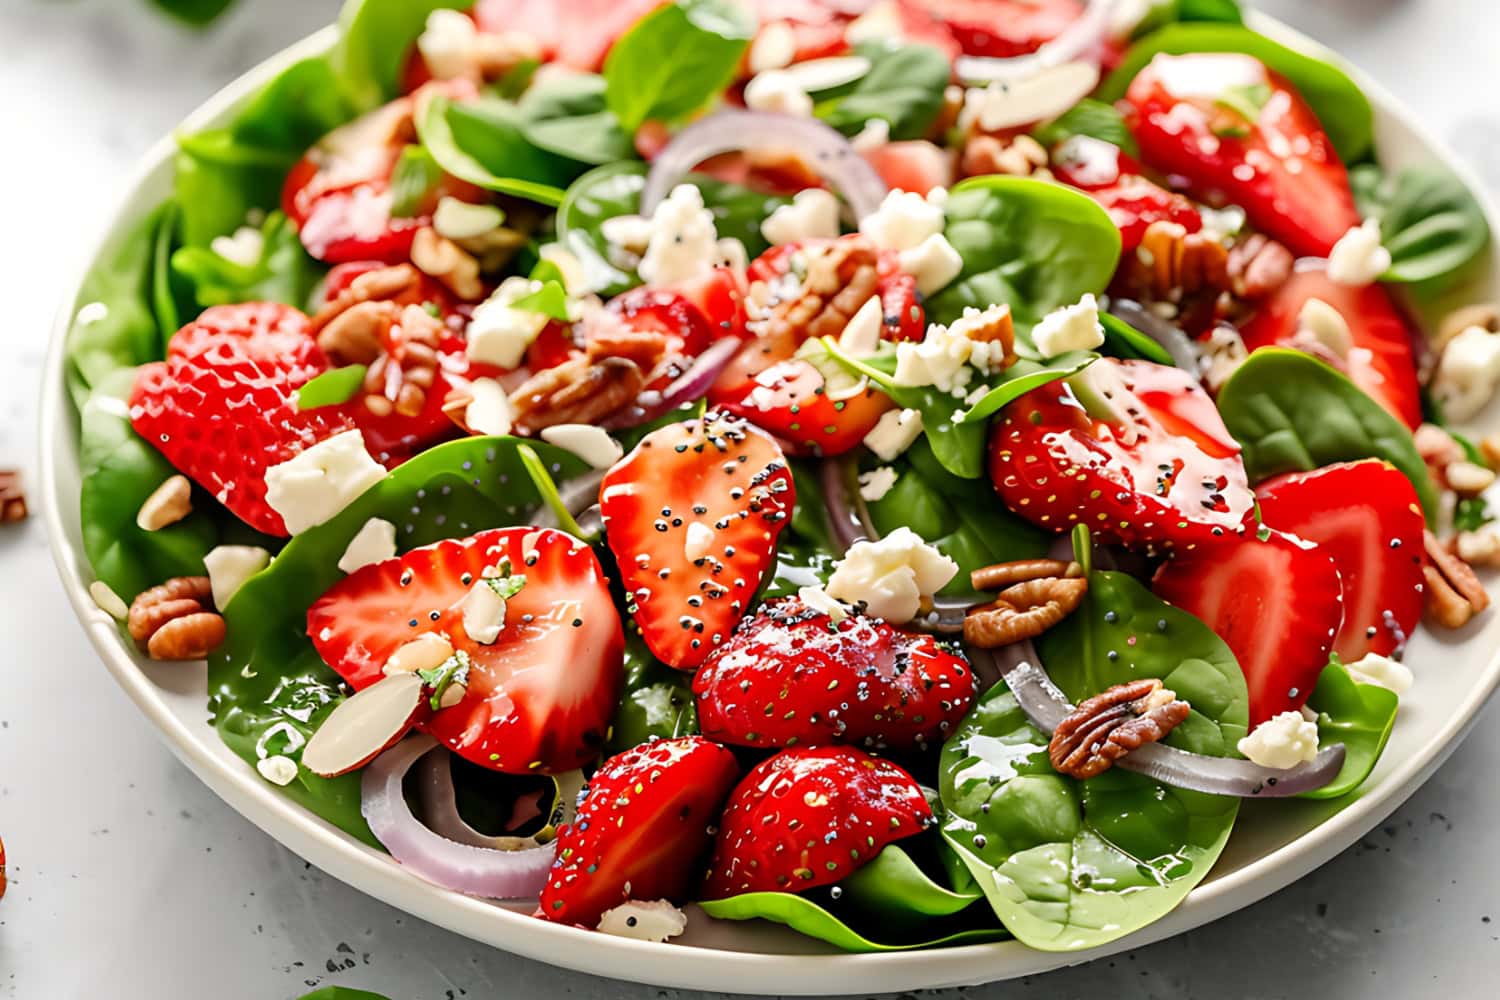 Spinach strawberry salad with poppy seed dressing served in a white plate.